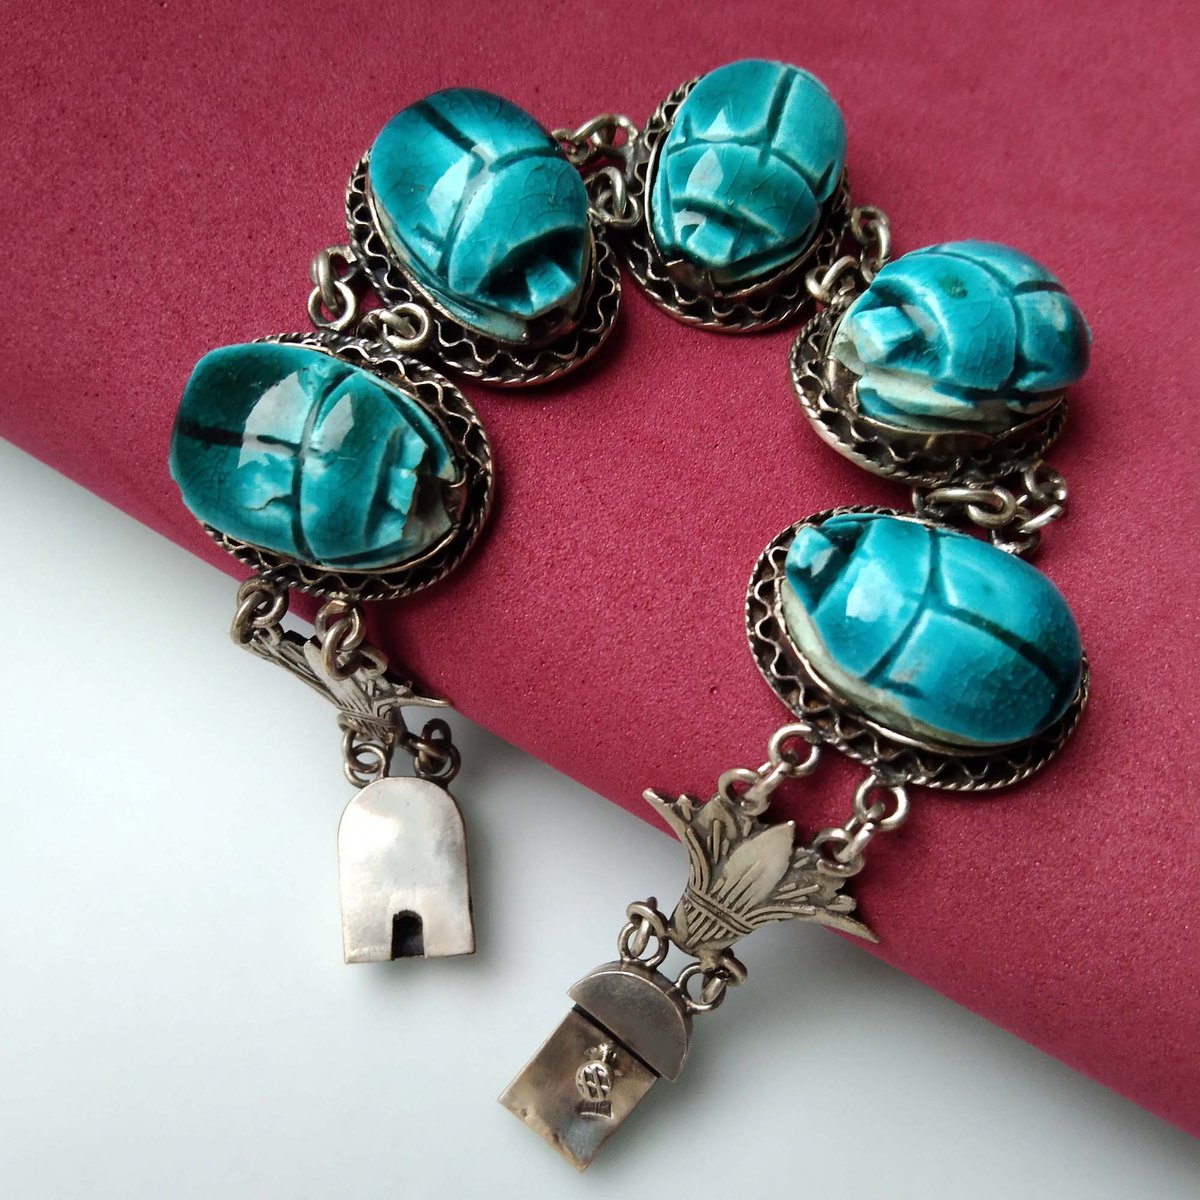 sochicfinds.com/products/egypt…
800 Silver Egyptian Revival Blue Scarab Link Bracelet 1940s #800Silver #EgyptianRevival #BlueScarab #LinkBracelet #1940sJewelry #ScarabBracelet